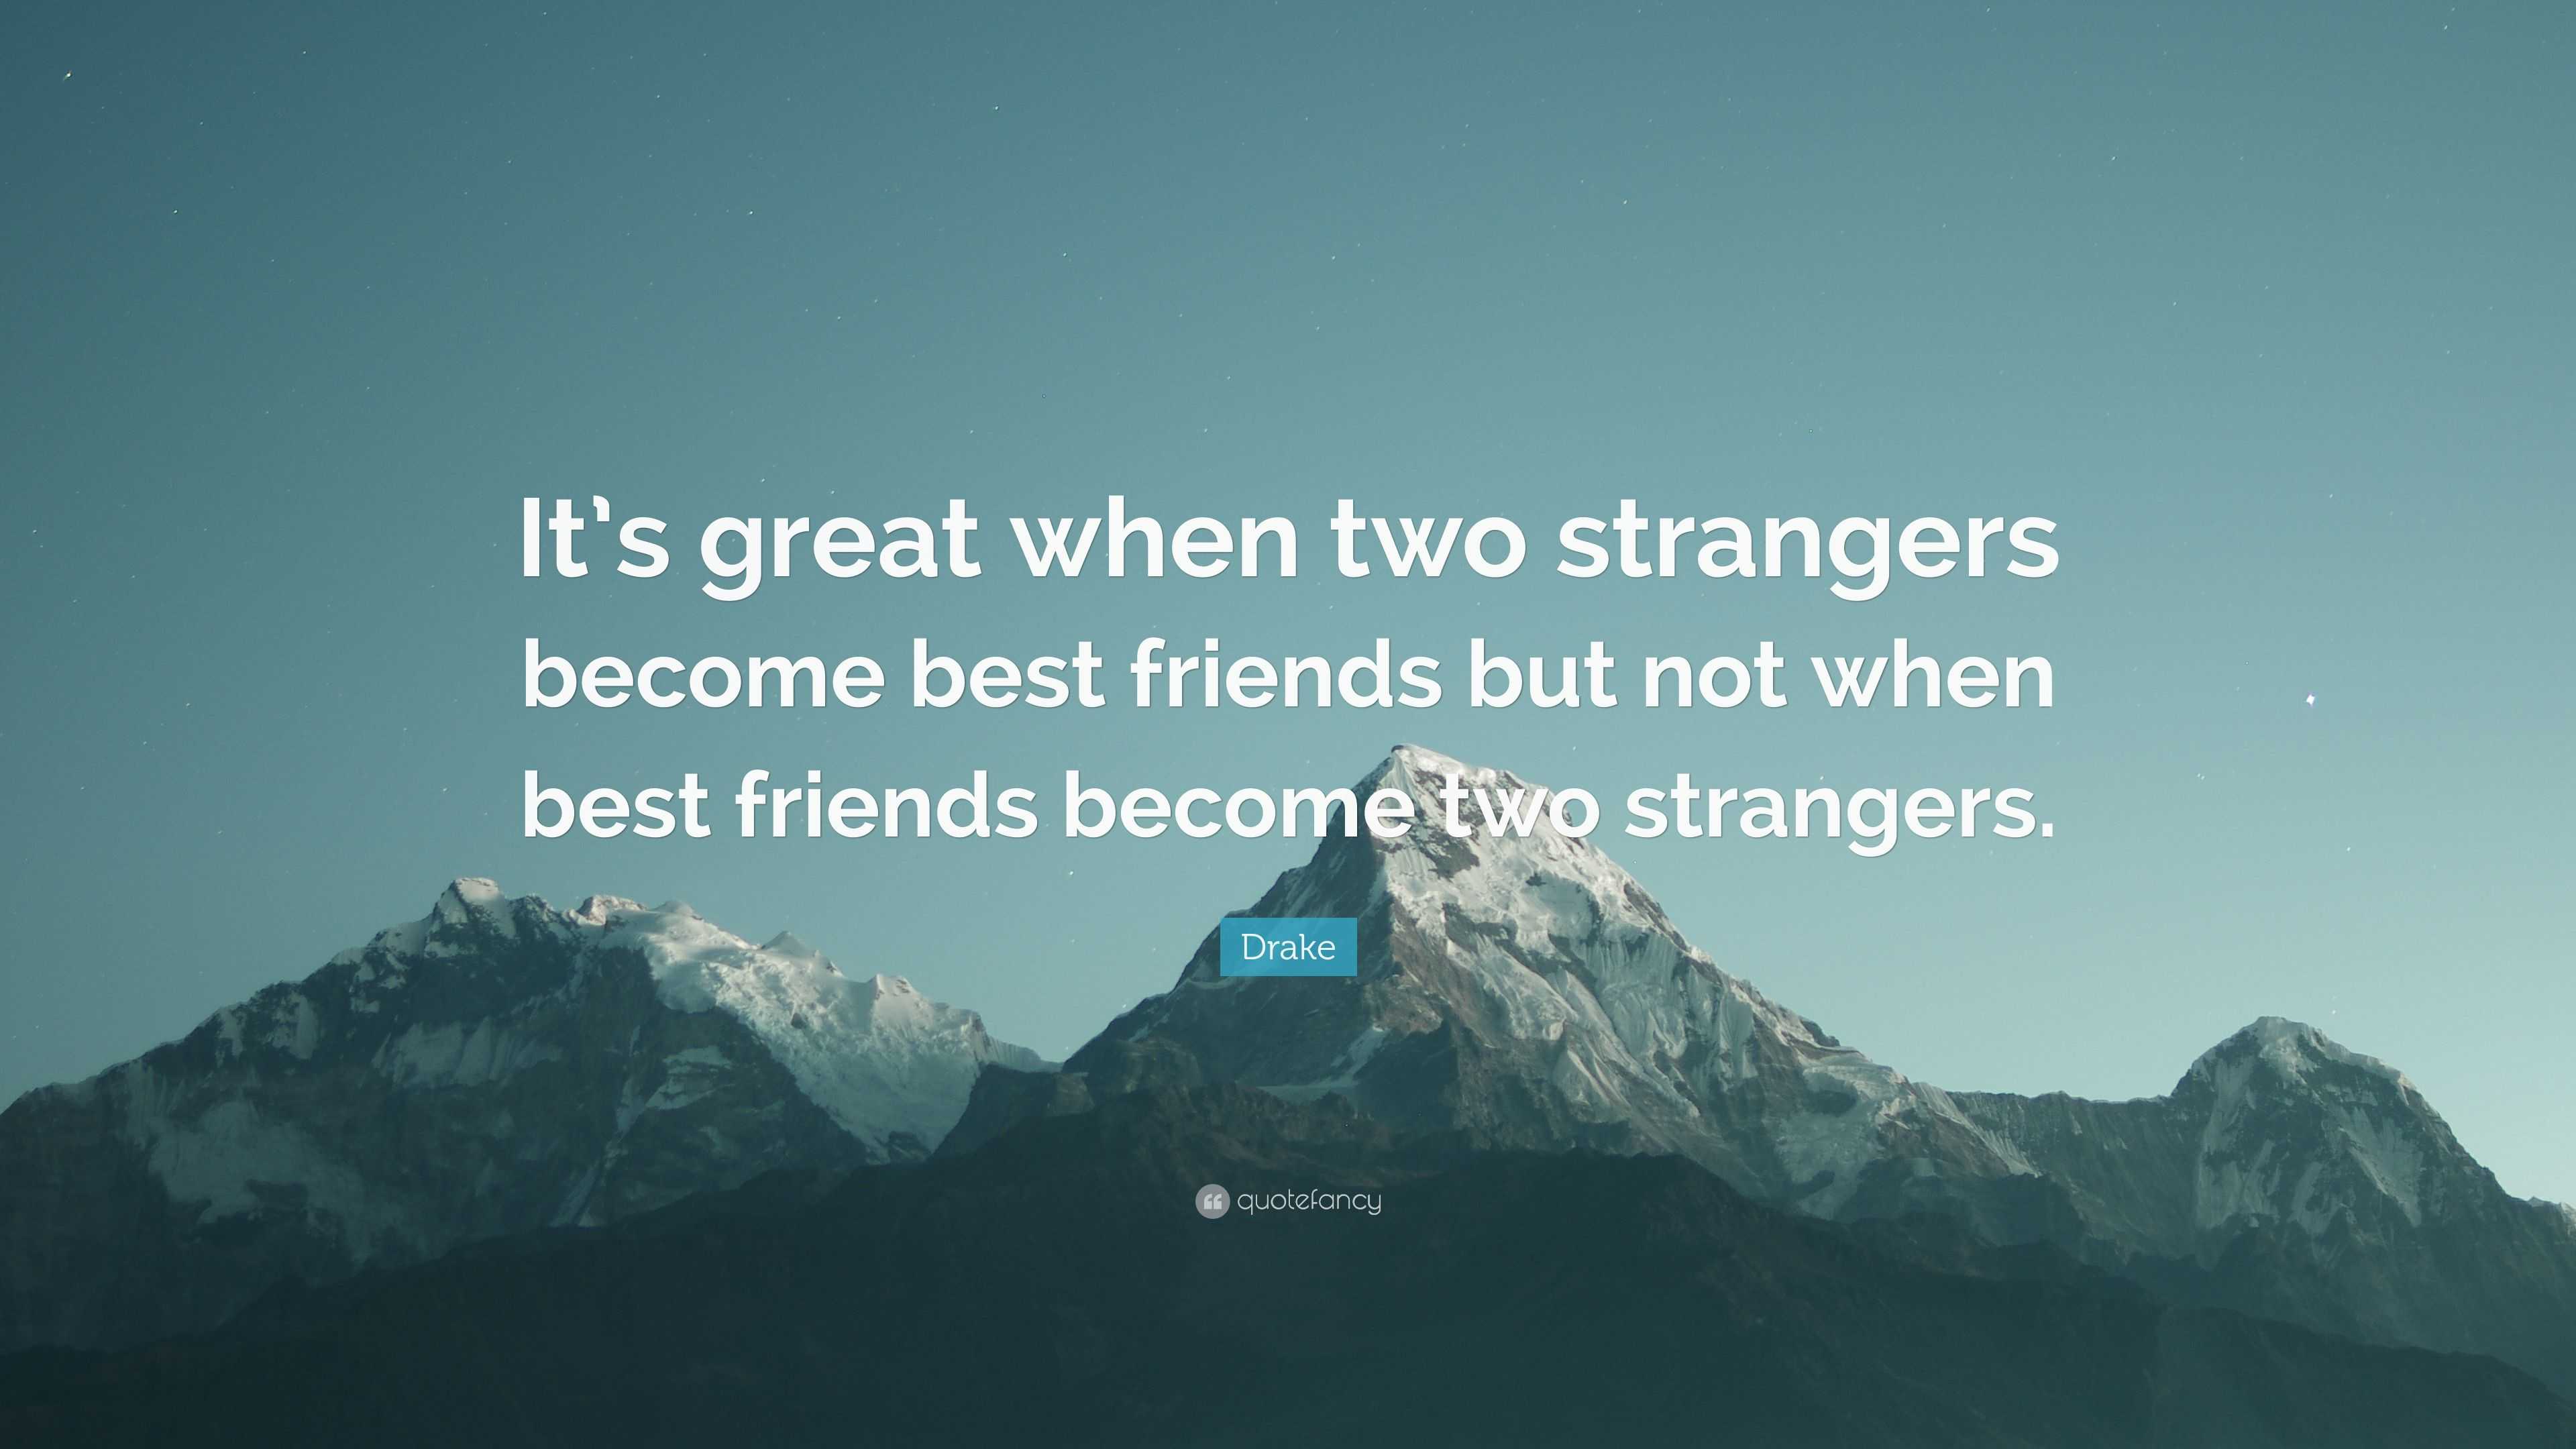 Drake quote: It's great when two strangers become best friends but not